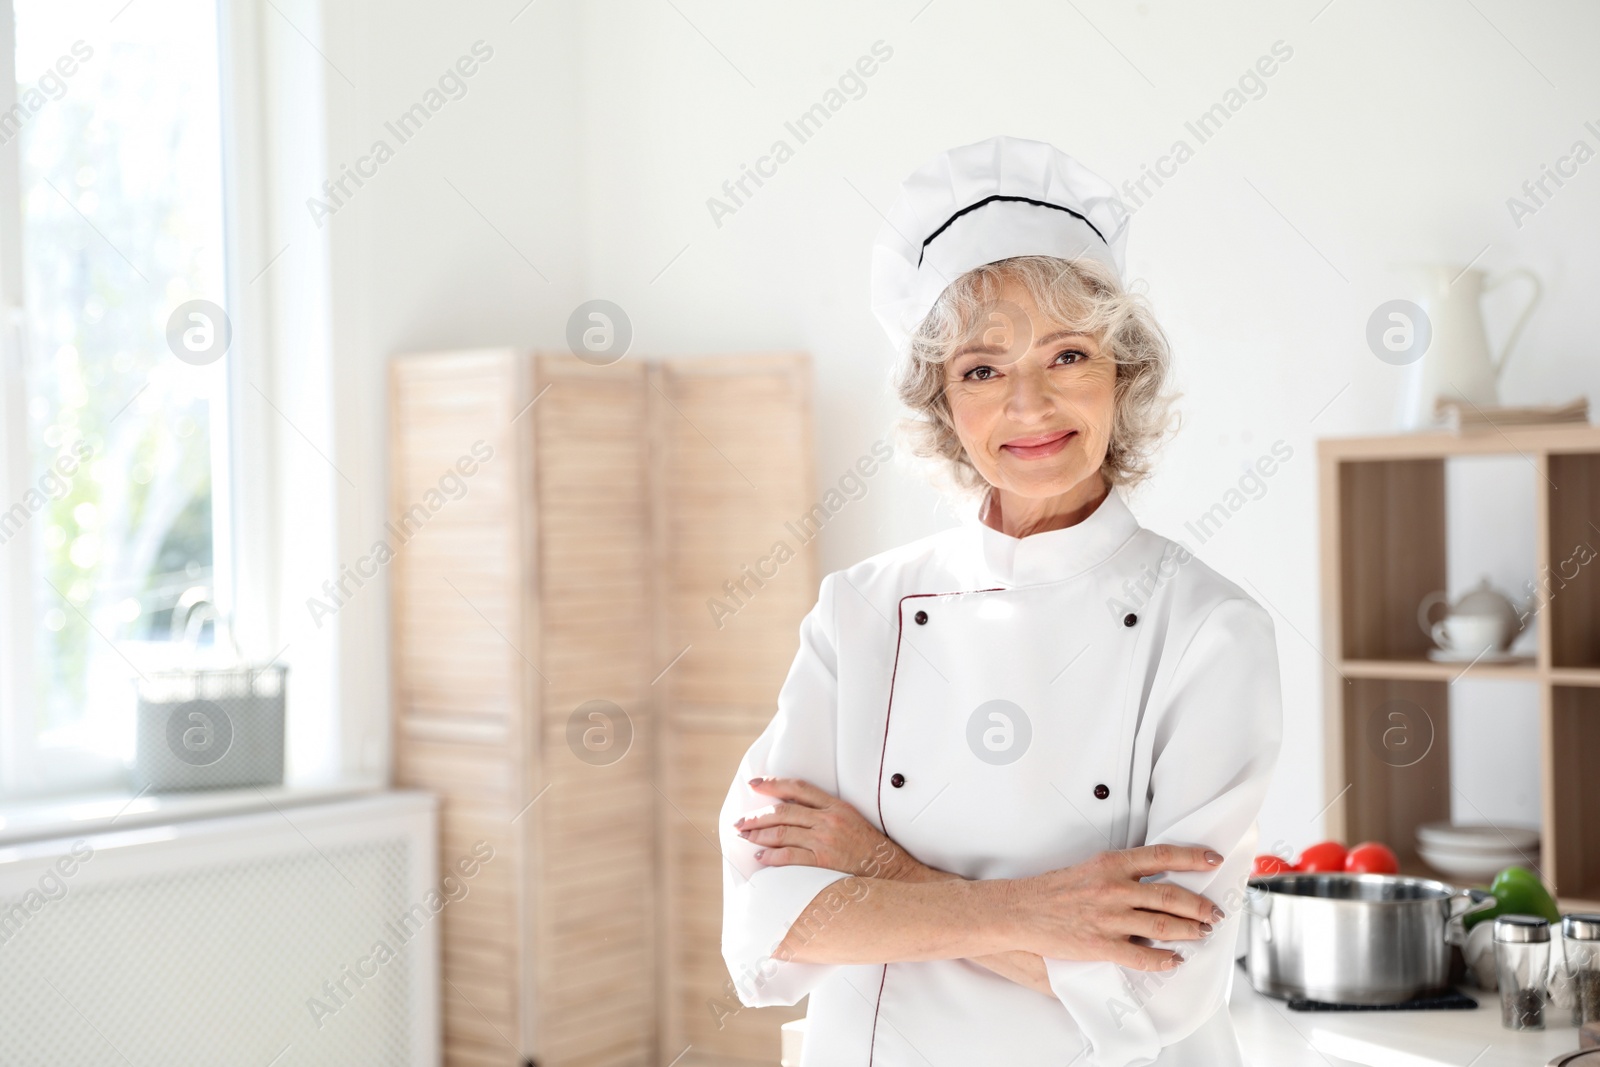 Photo of Professional female chef wearing uniform in kitchen